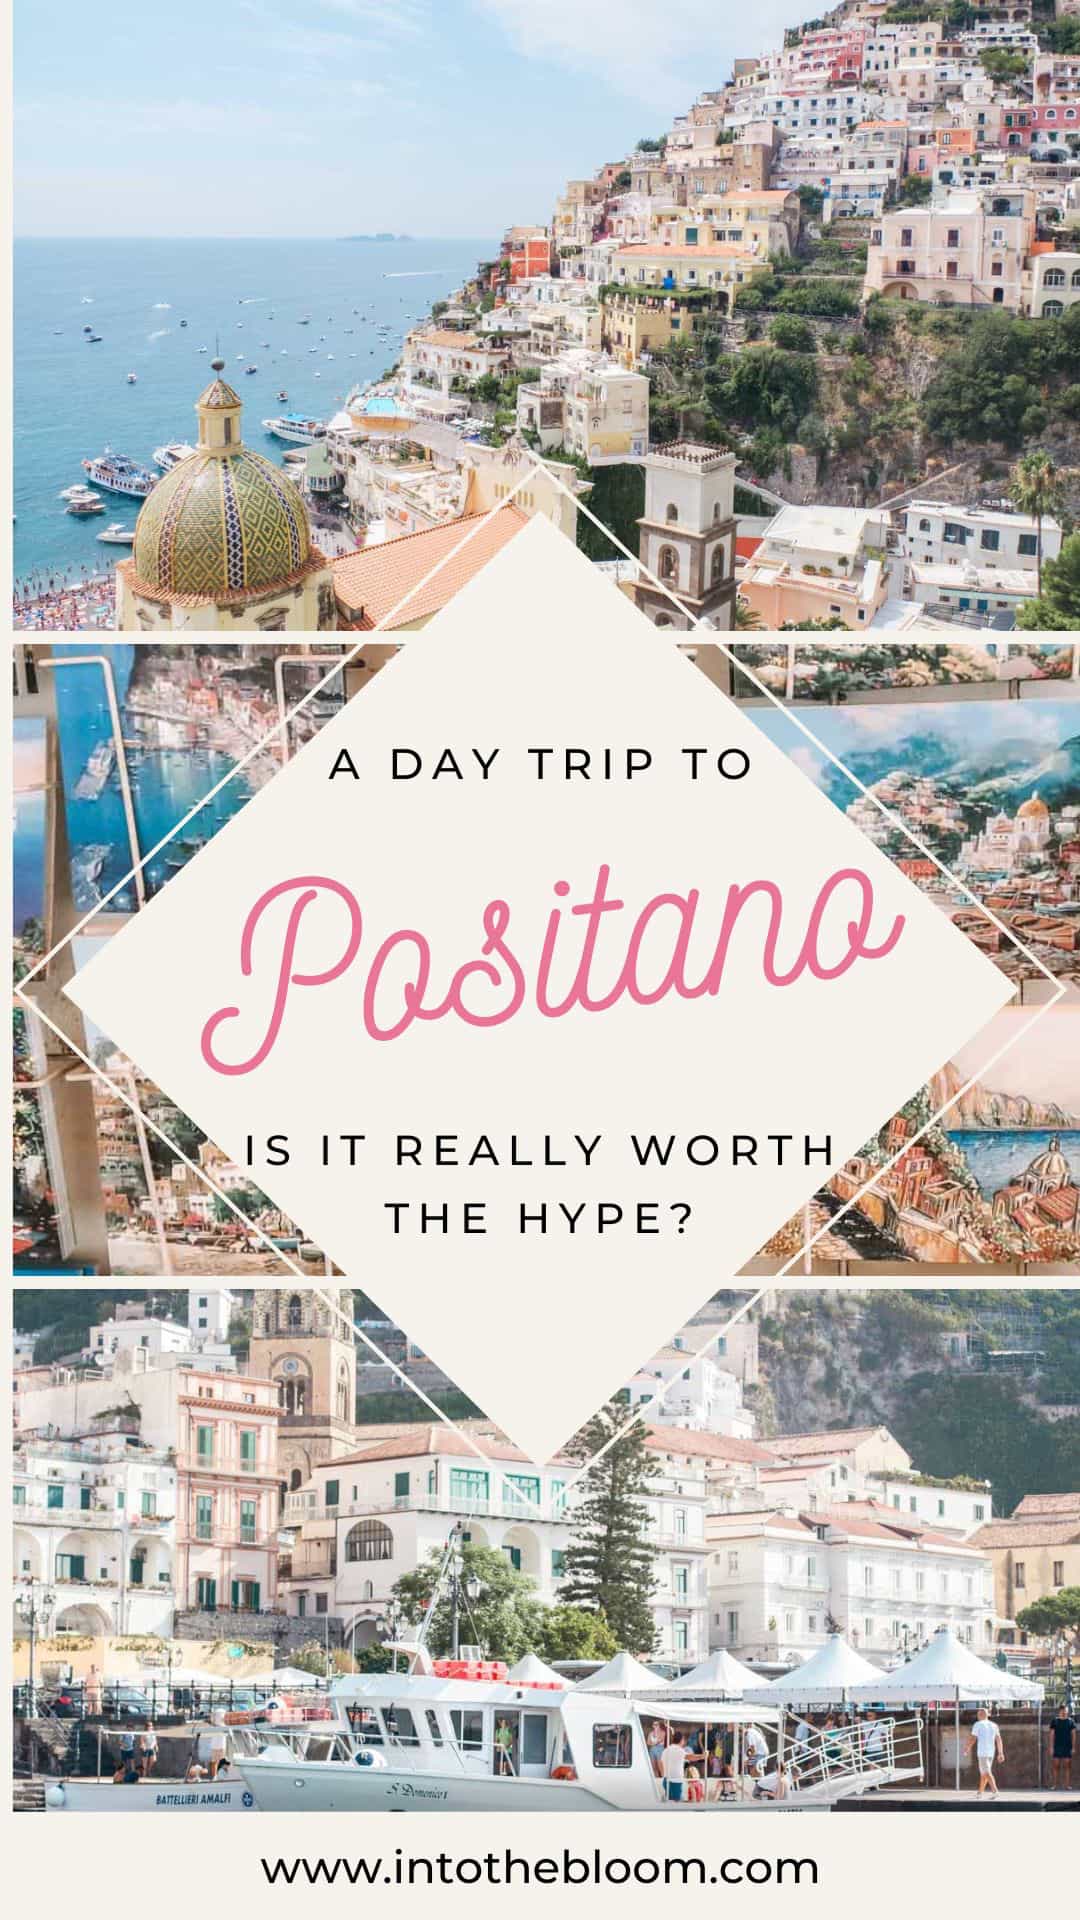 A day trip to Positano - is it really worth the hype?